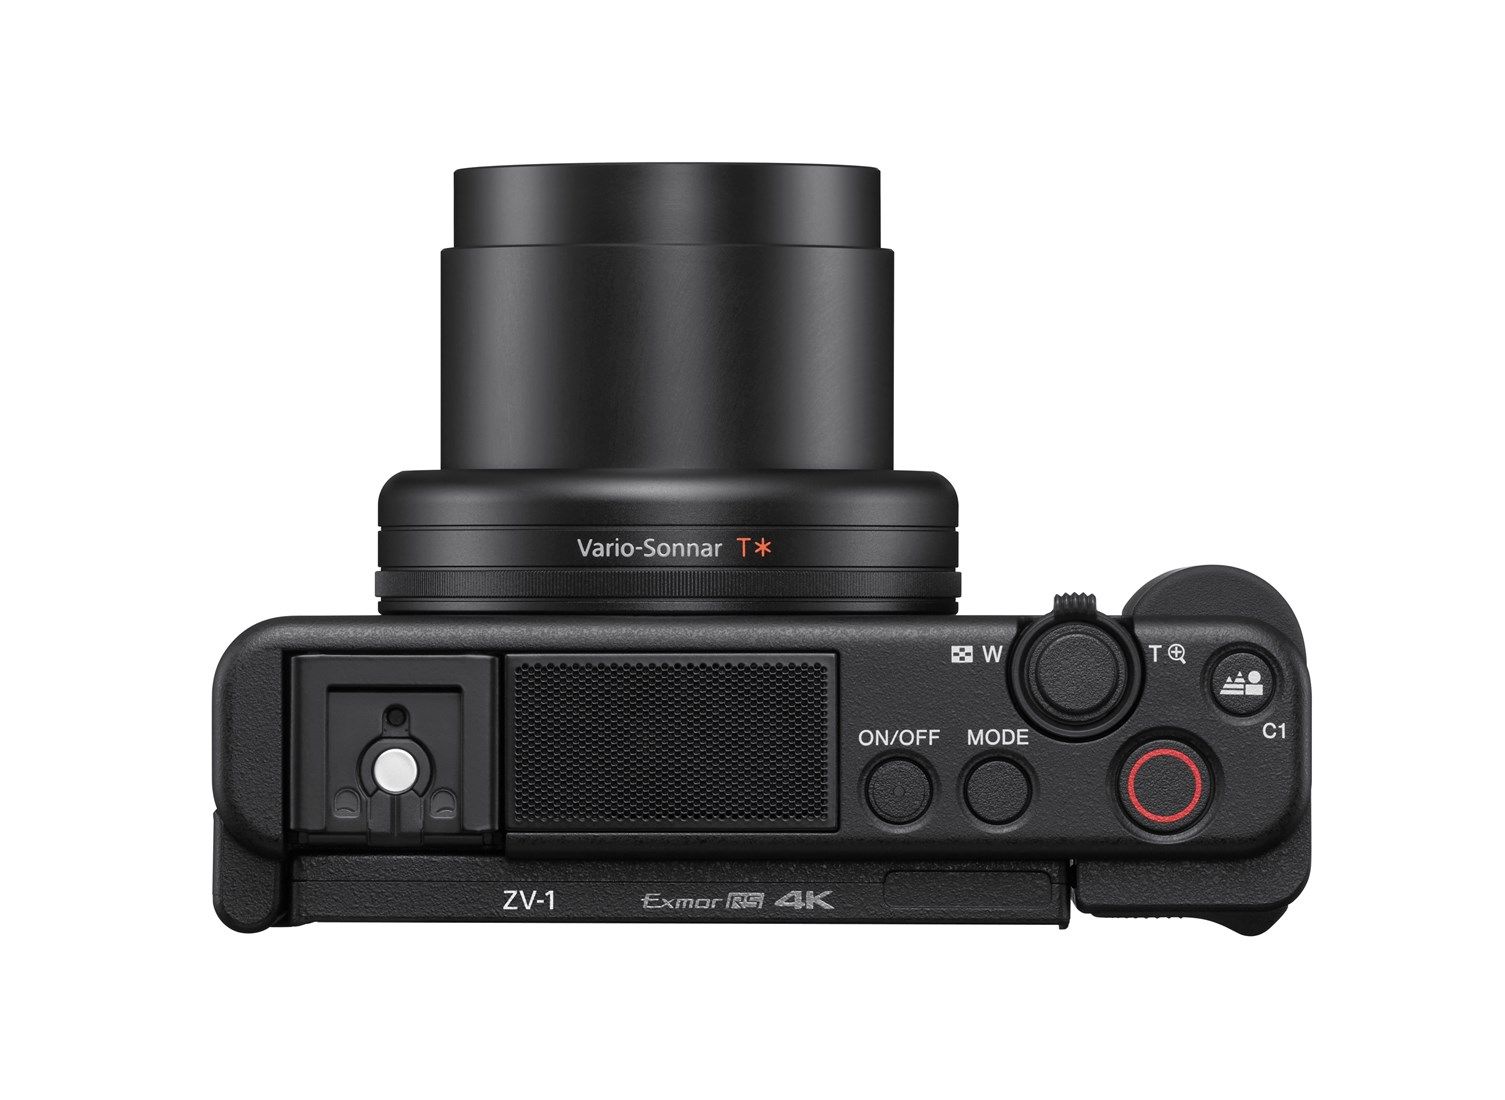 Sony ZV-1 Compact Digital Camera 4K UHD - Black - Perfect for Vloggers - Product Photo 5 - Top down view of the camera unit and controls